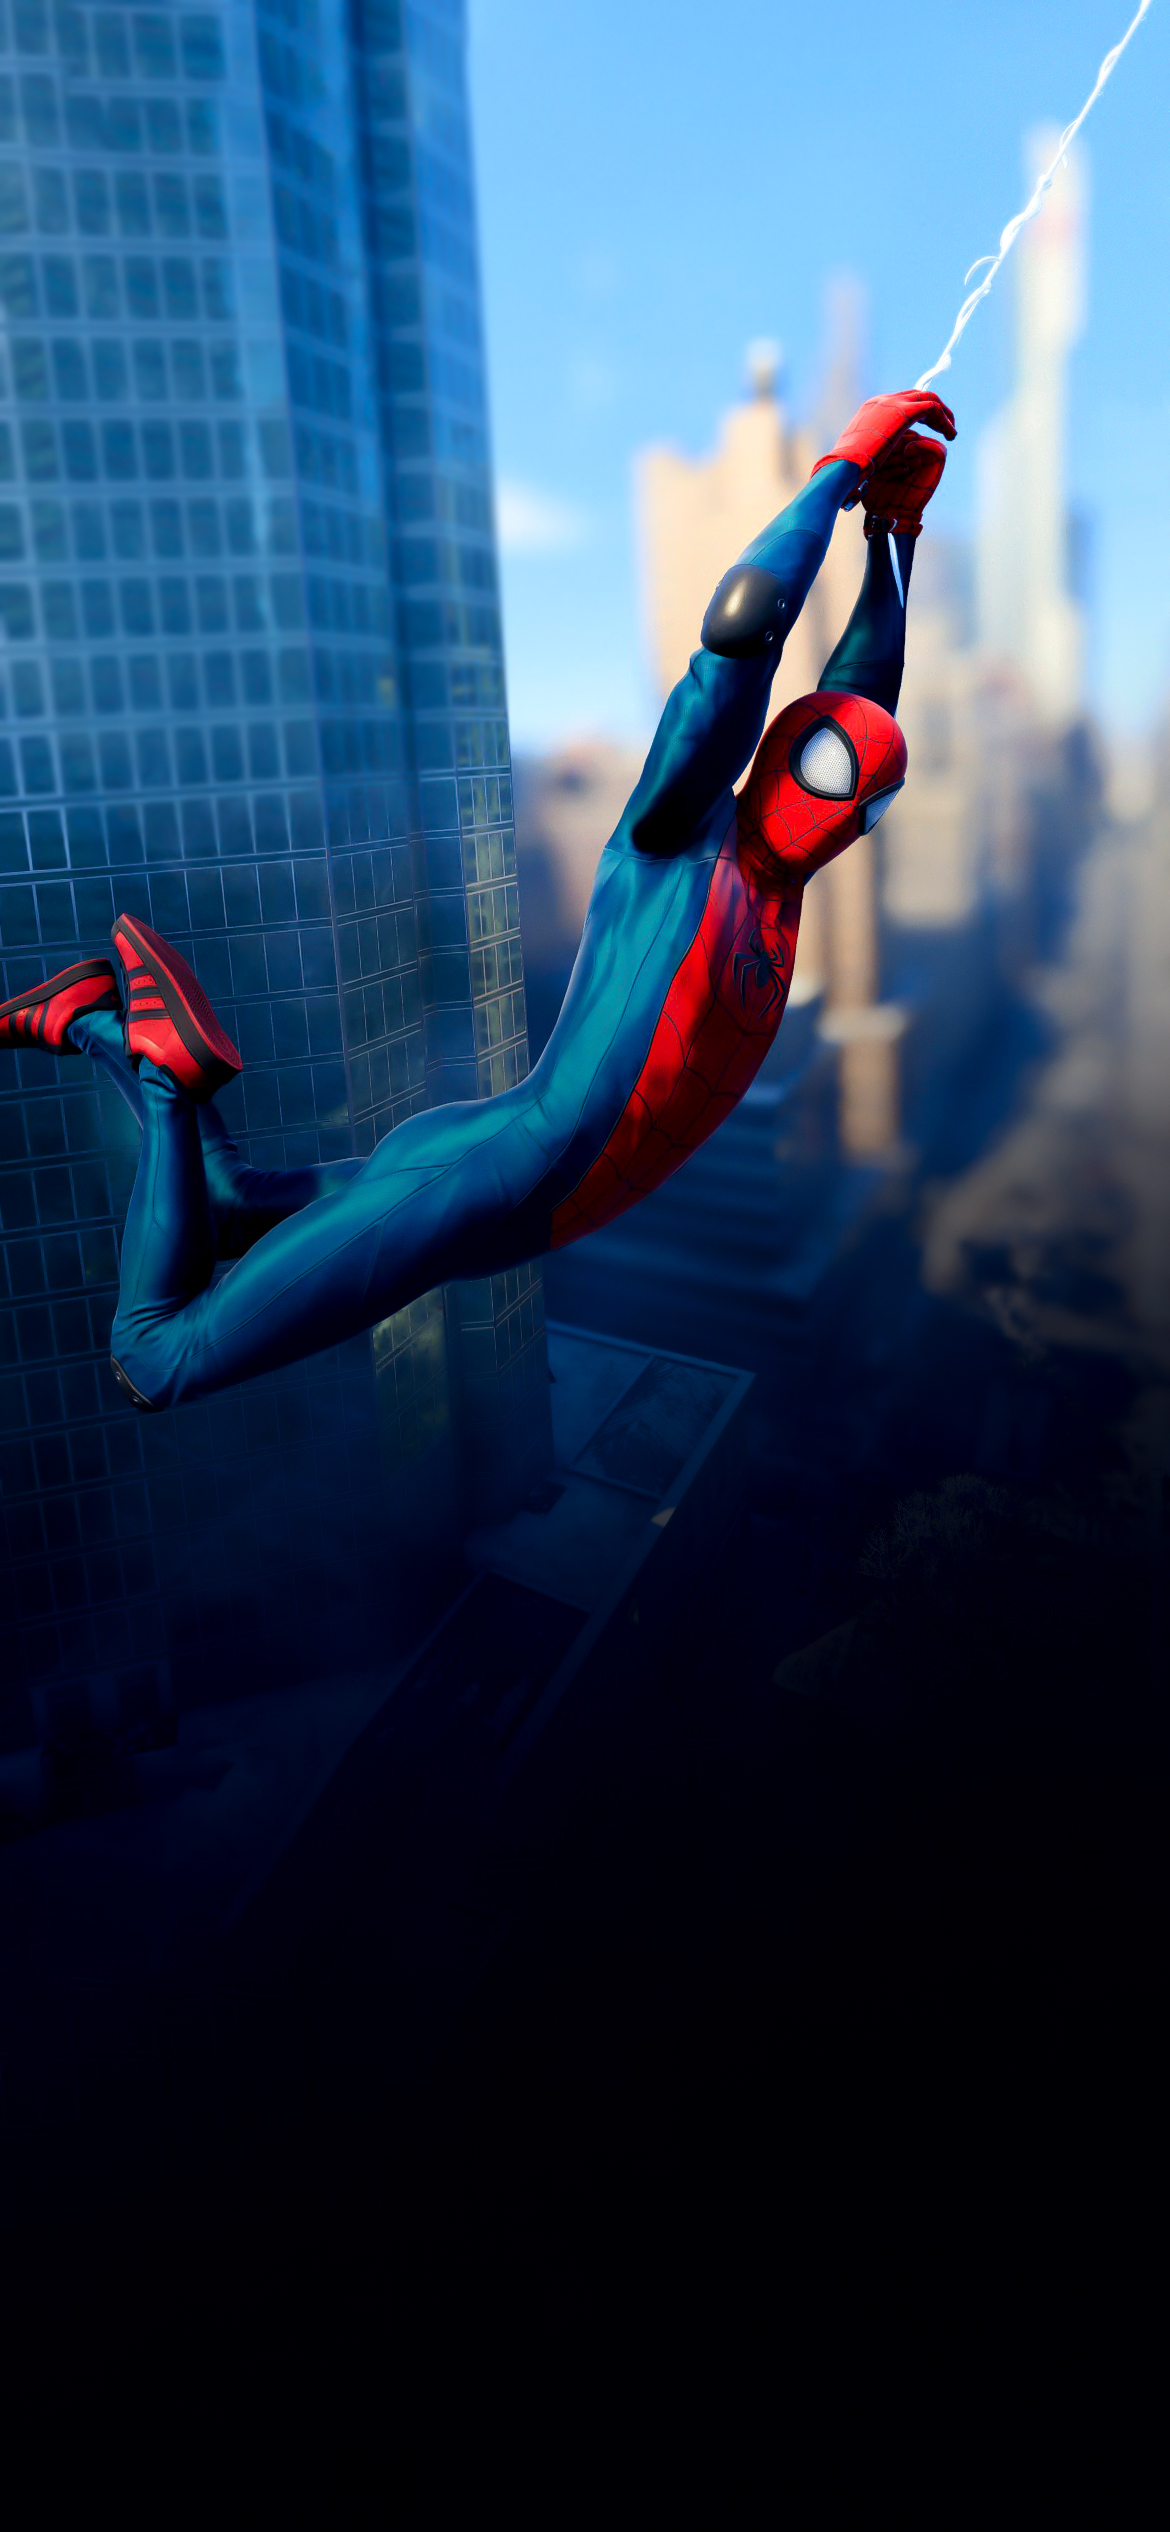 Spider Man Wallpaper For Phone